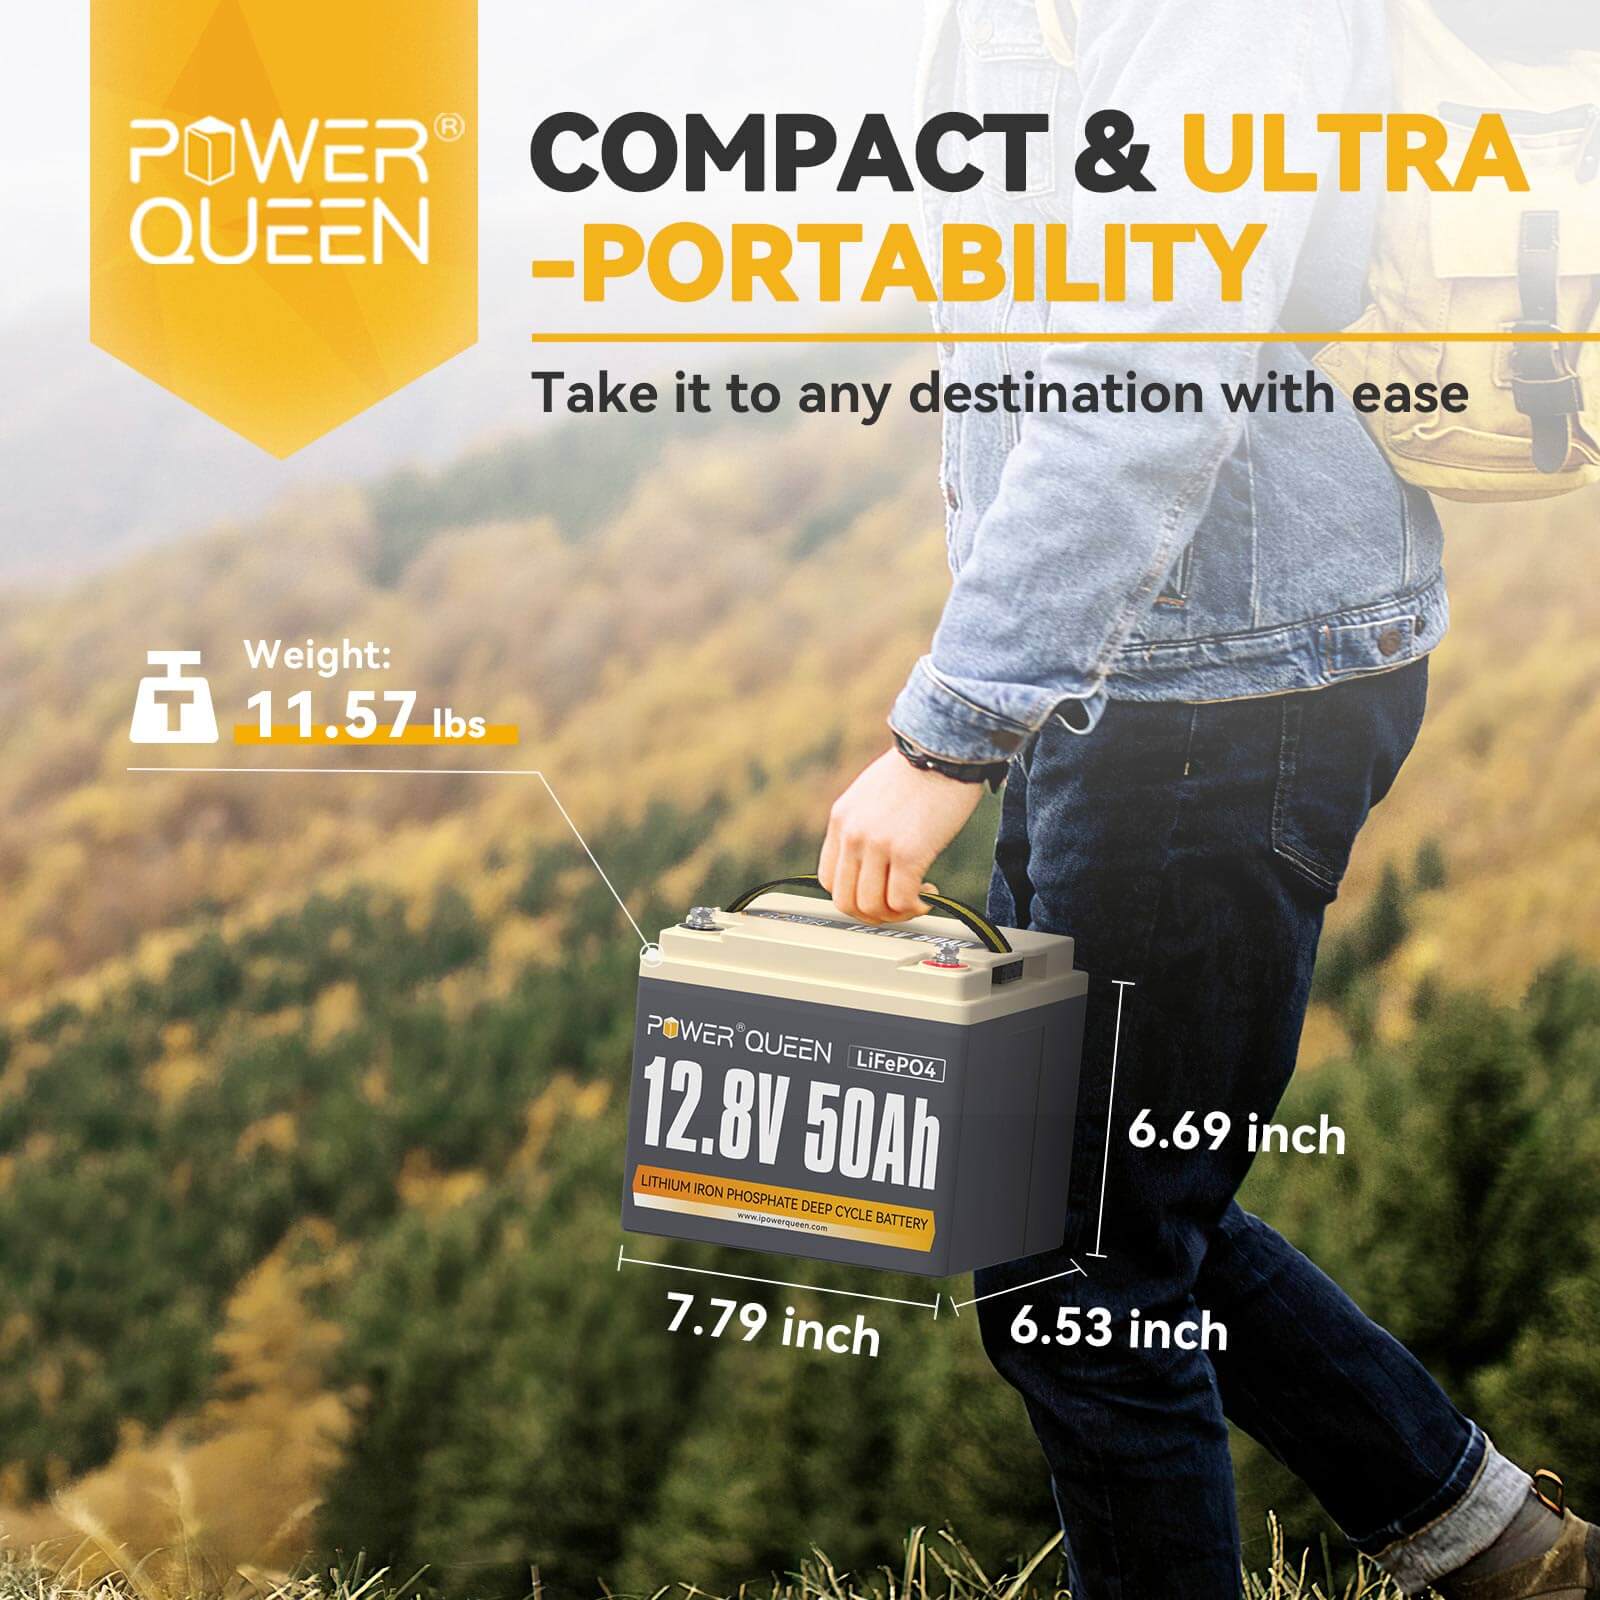 Power Queen 12.8V 50Ah LiFePO4 Battery + 14.6V 10A Charger